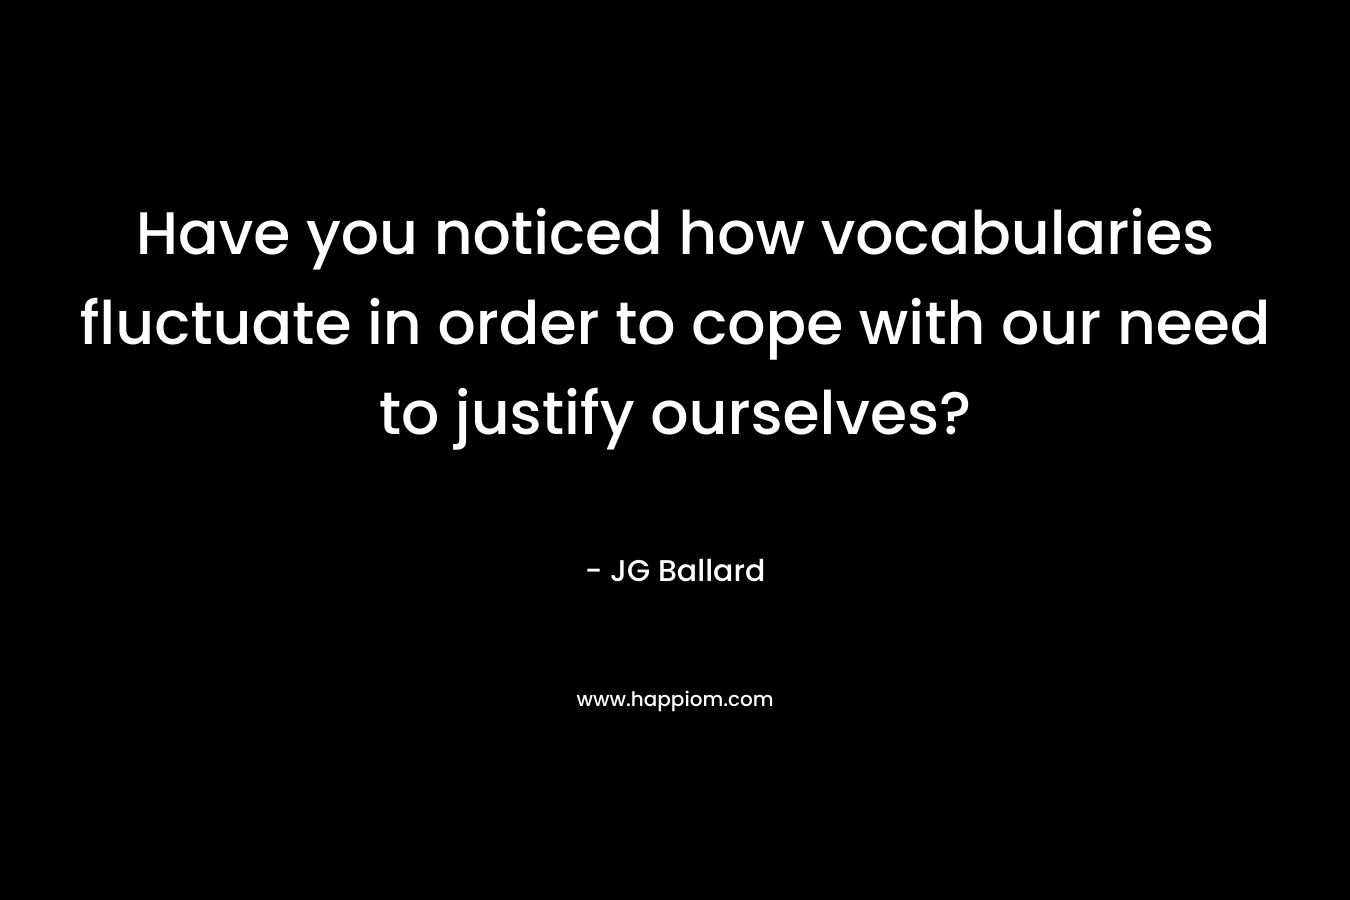 Have you noticed how vocabularies fluctuate in order to cope with our need to justify ourselves? – JG Ballard